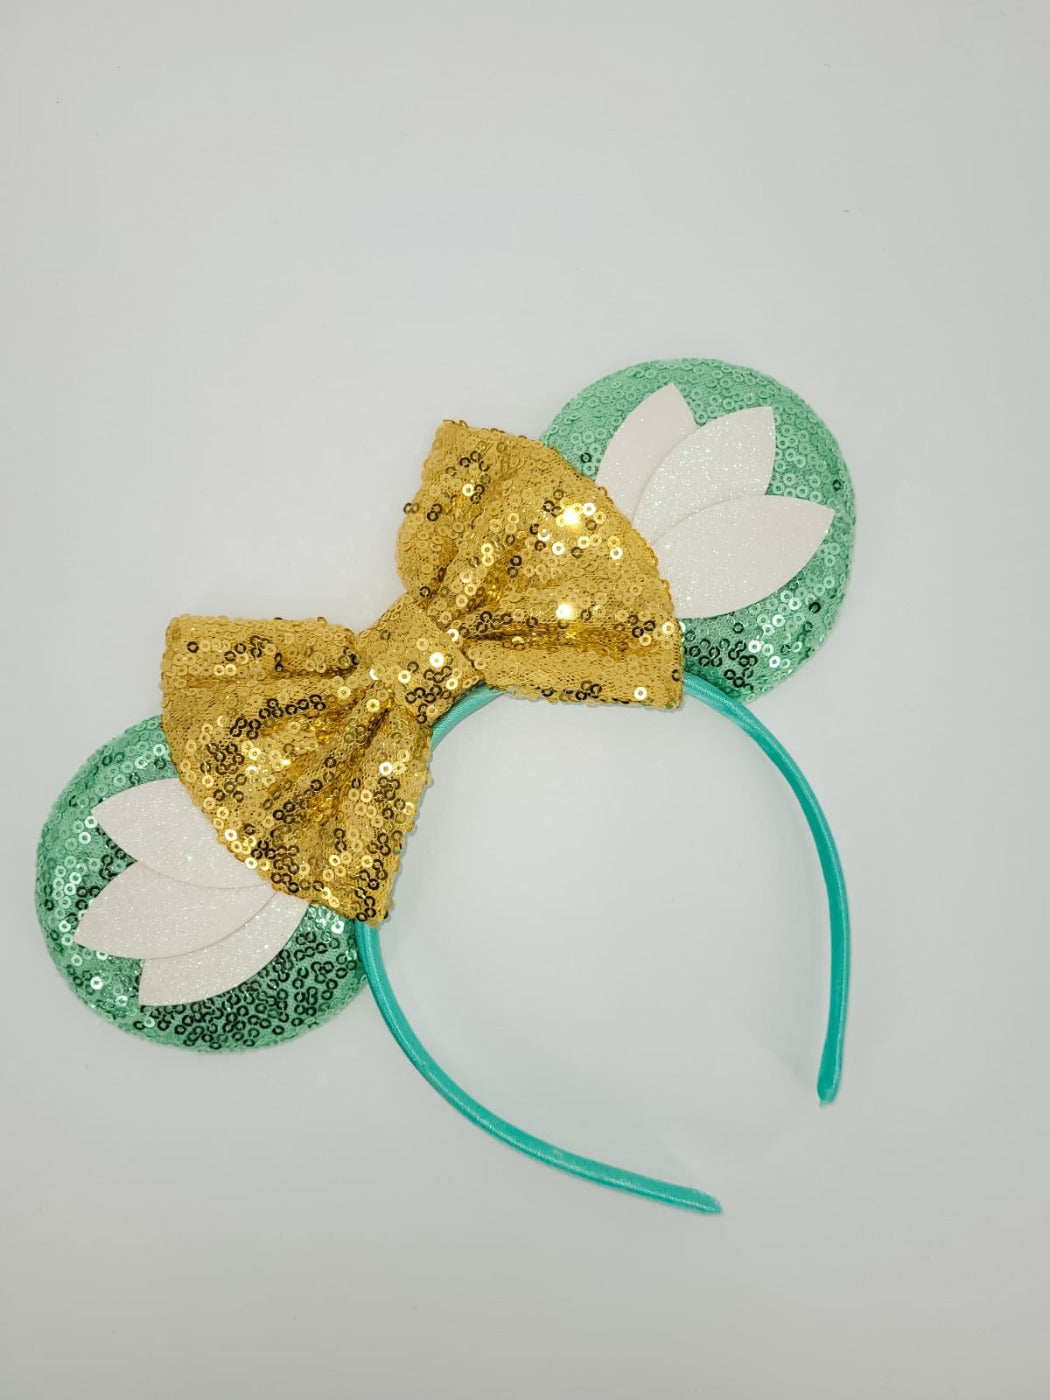 Green Lily Pad Themed Ear Headband with Gold Sequined Bow